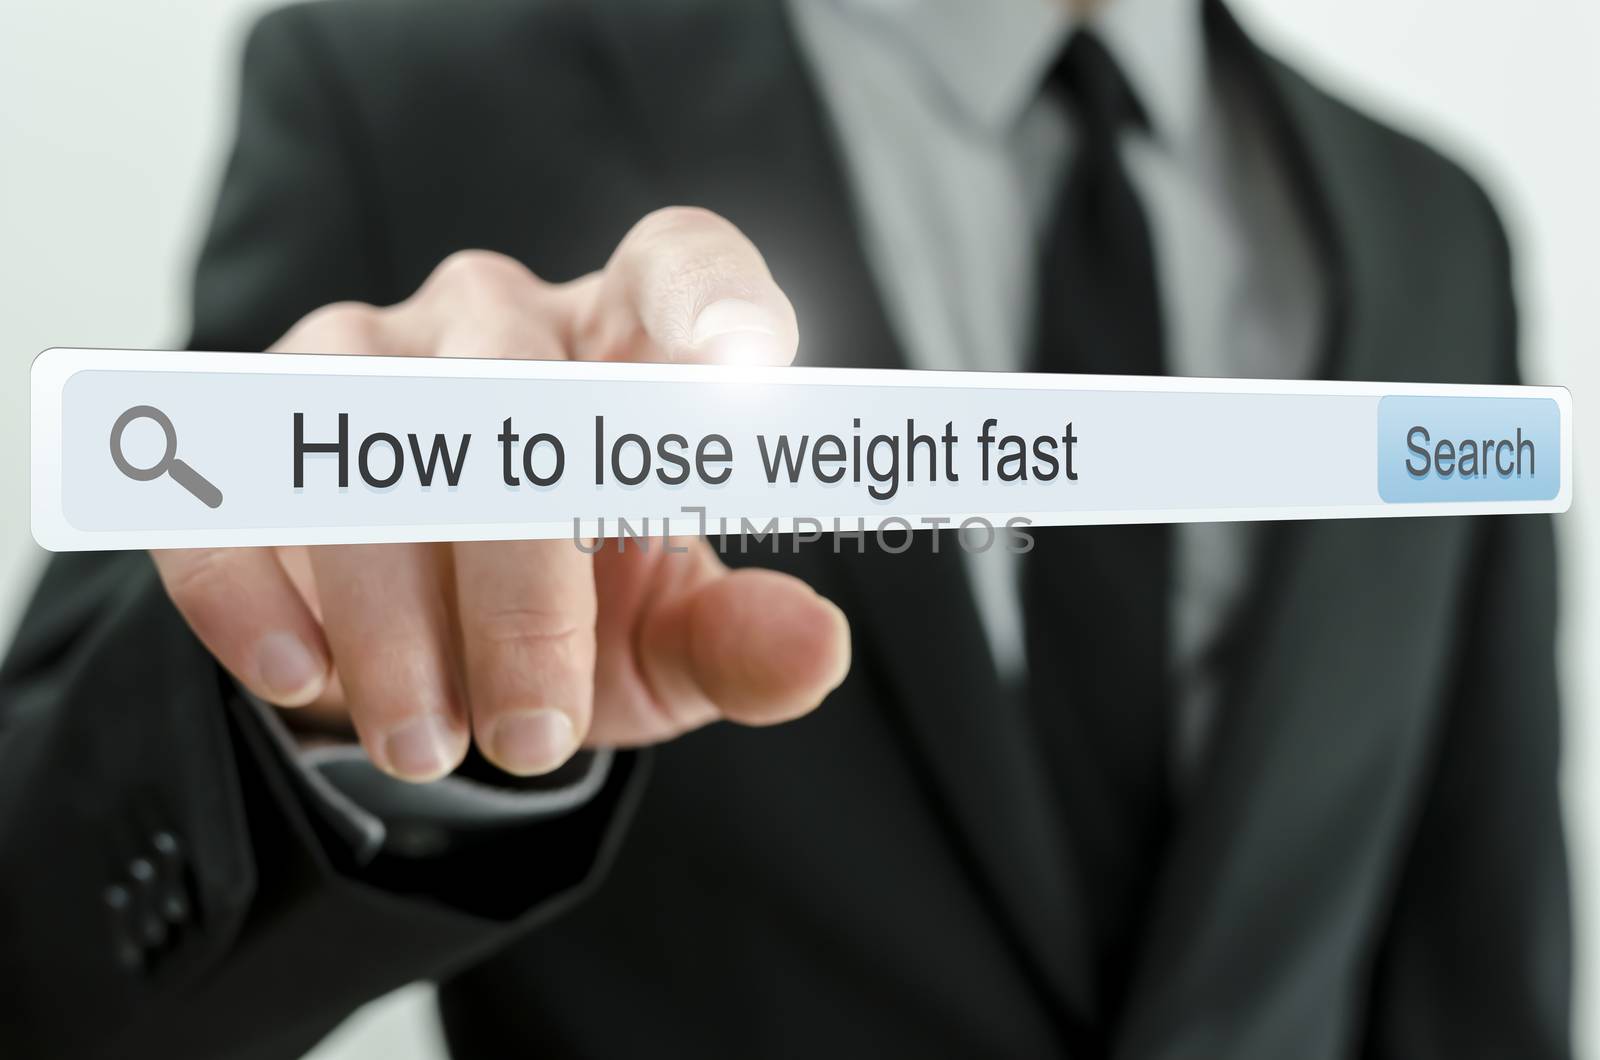 How to lose weight fast written in search bar on virtual screen.